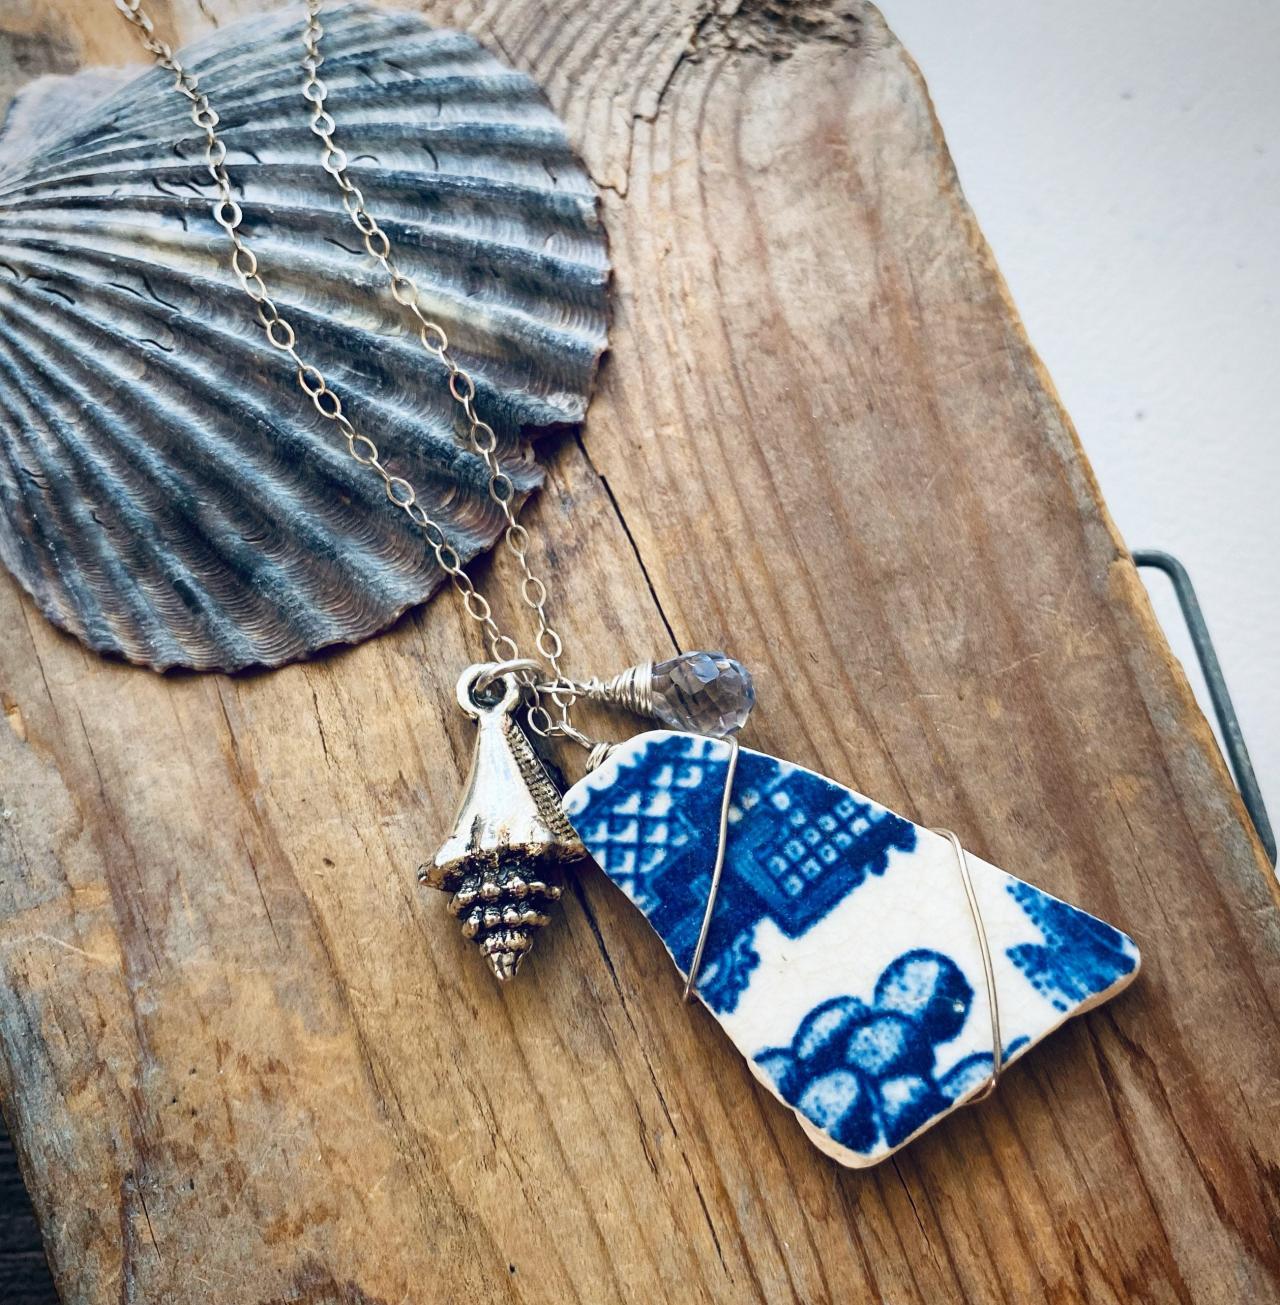 Sea Pottery Necklace Cobalt White With Silver Conch Shell And Mystic Quartz Sterling Silver Jewelry Beachy Summer Bridesmaid Beach Weddings